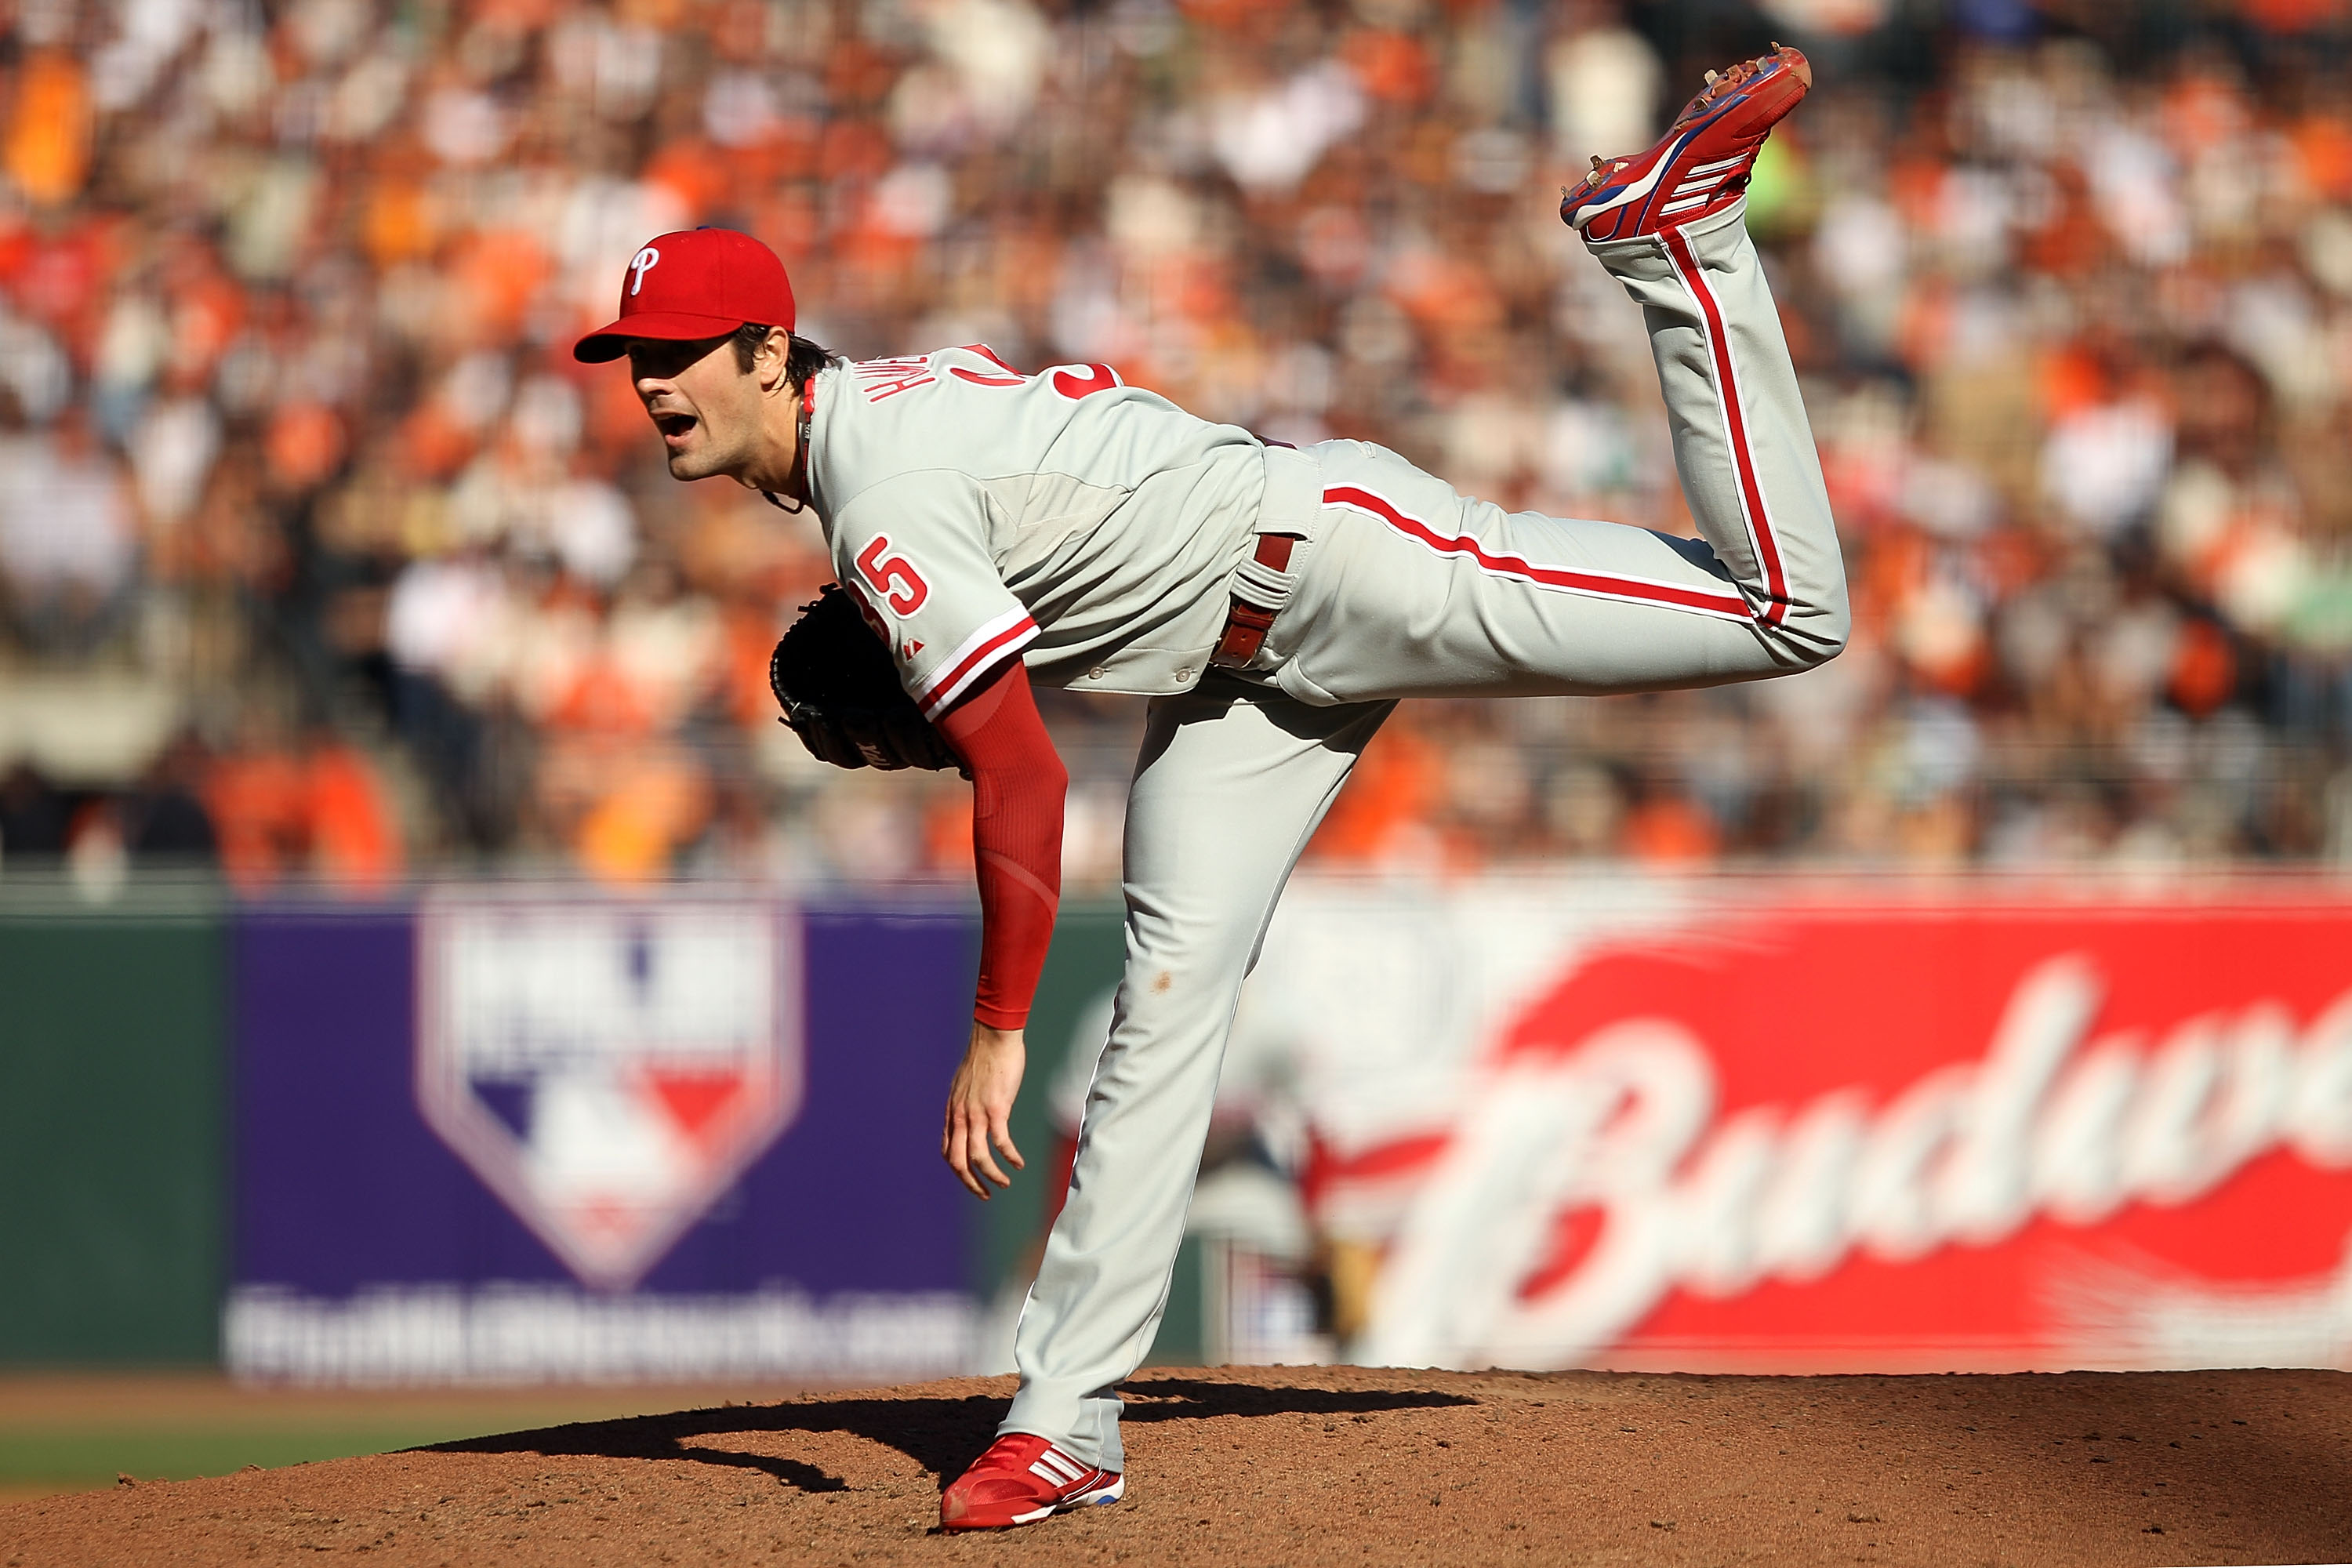 SAN FRANCISCO - OCTOBER 19:  Cole Hamels #35 of the Philadelphia Phillies throws a pitch against the San Francisco Giants in Game Three of the NLCS during the 2010 MLB Playoffs at AT&T Park on October 19, 2010 in San Francisco, California.  (Photo by Ezra